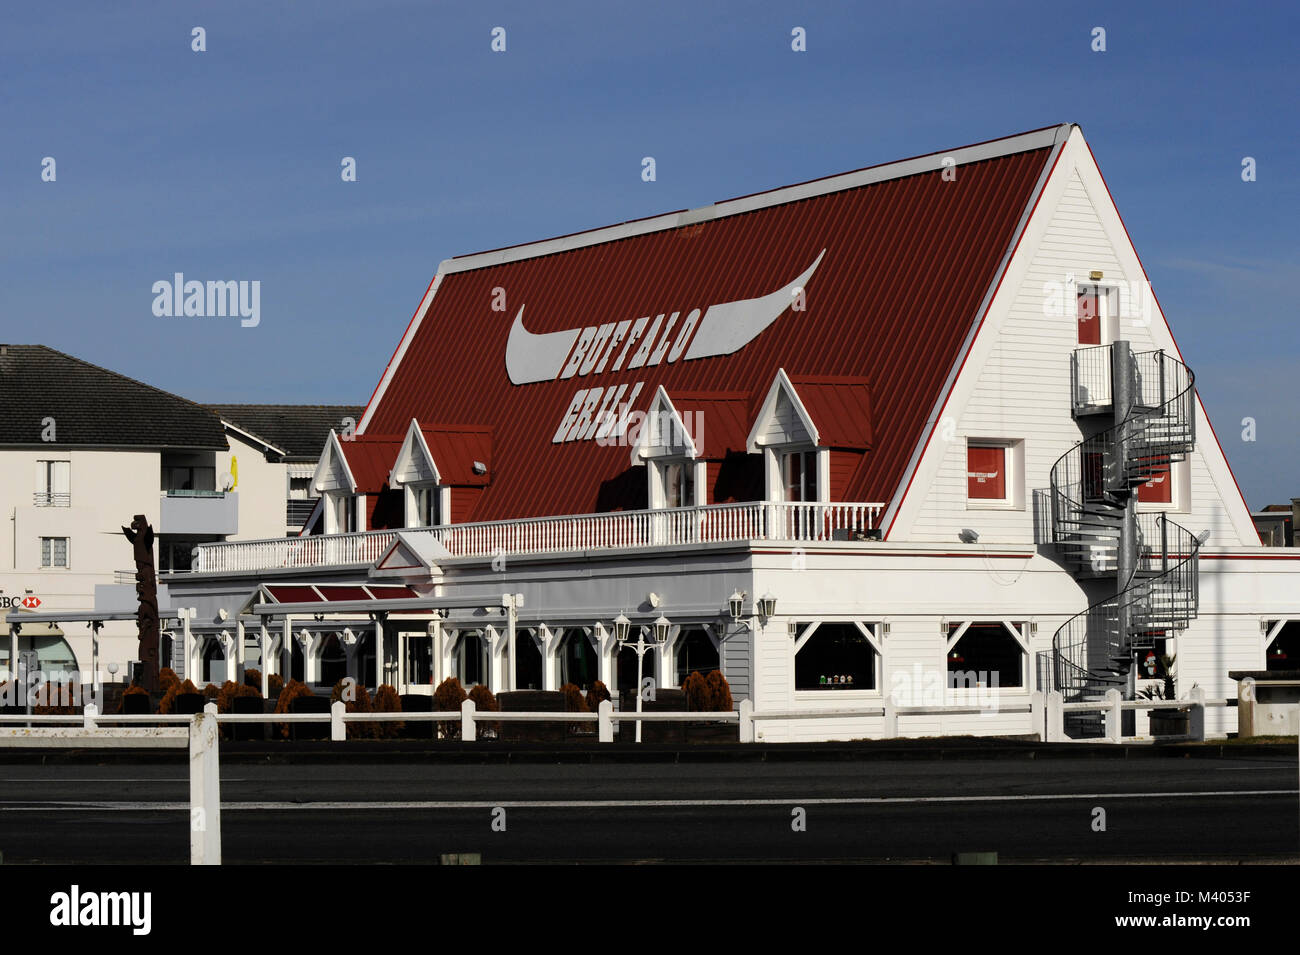 BUFFALO GRILL RESTAURANT FRANCE - AMERICAN STYLE FOOD IN FRANCE Stock Photo  - Alamy